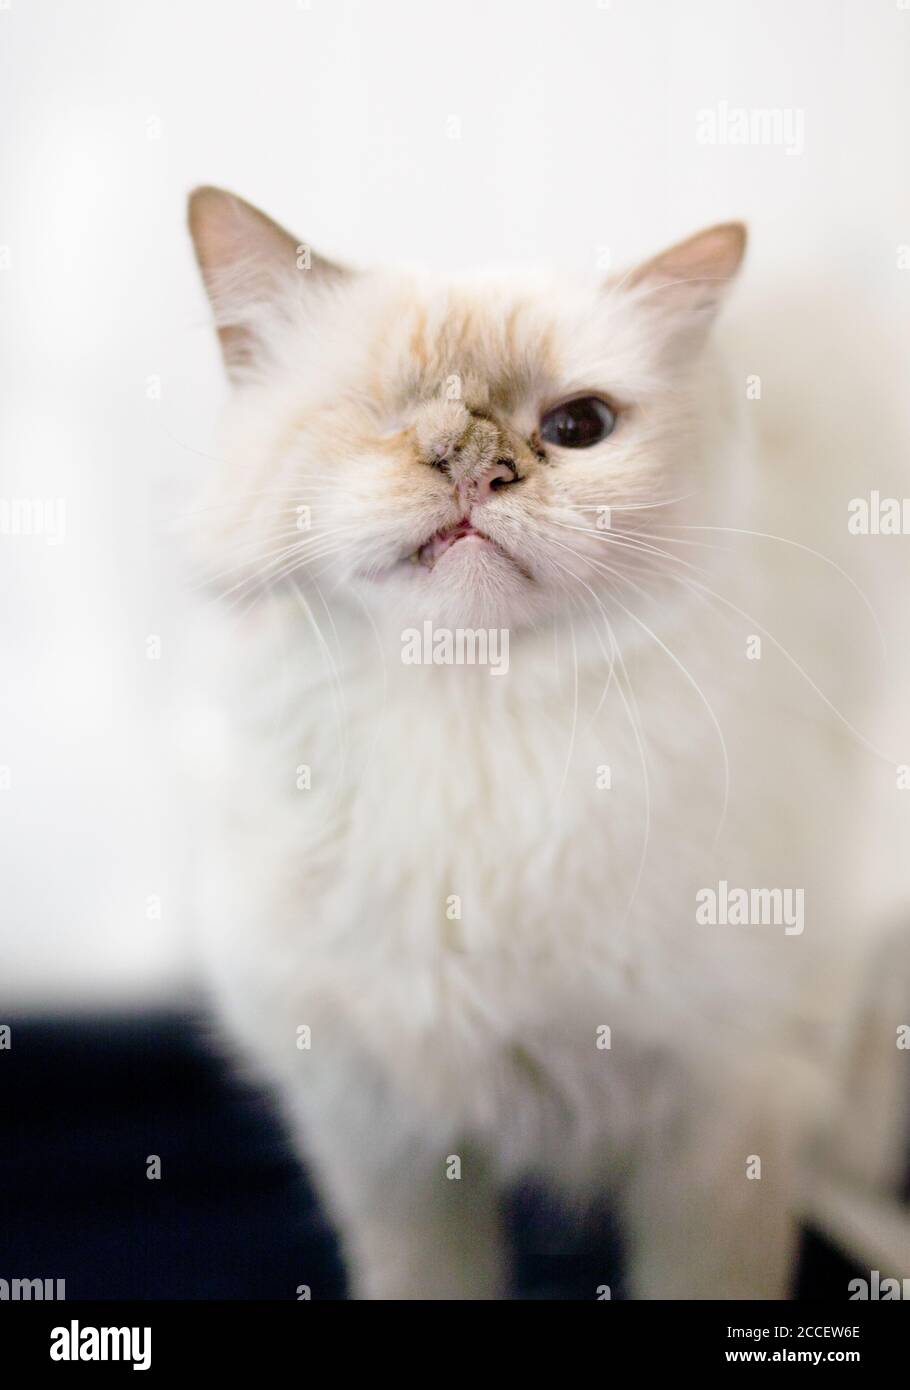 One Eyed Cat Recovered from Cleft Palate Corrective Surgery Stock Photo